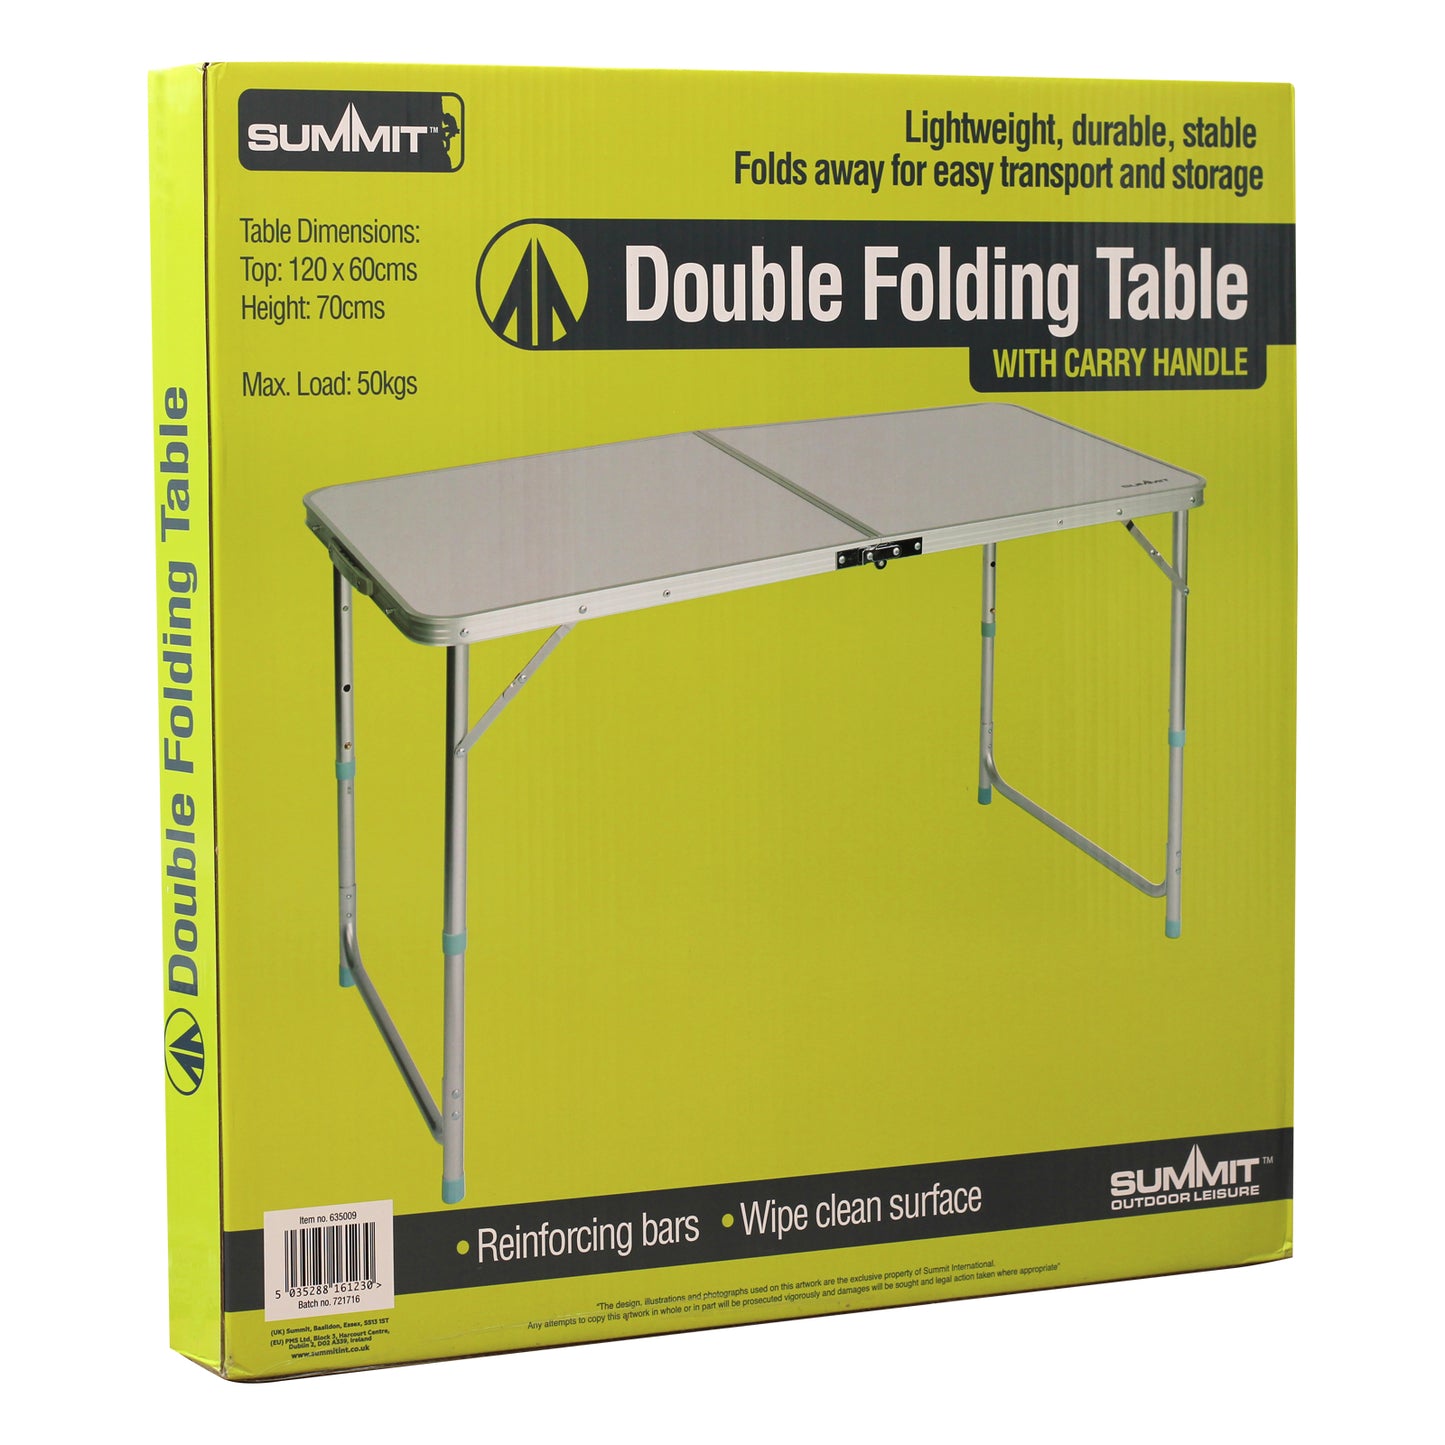 Summit Double Folding Table in Box